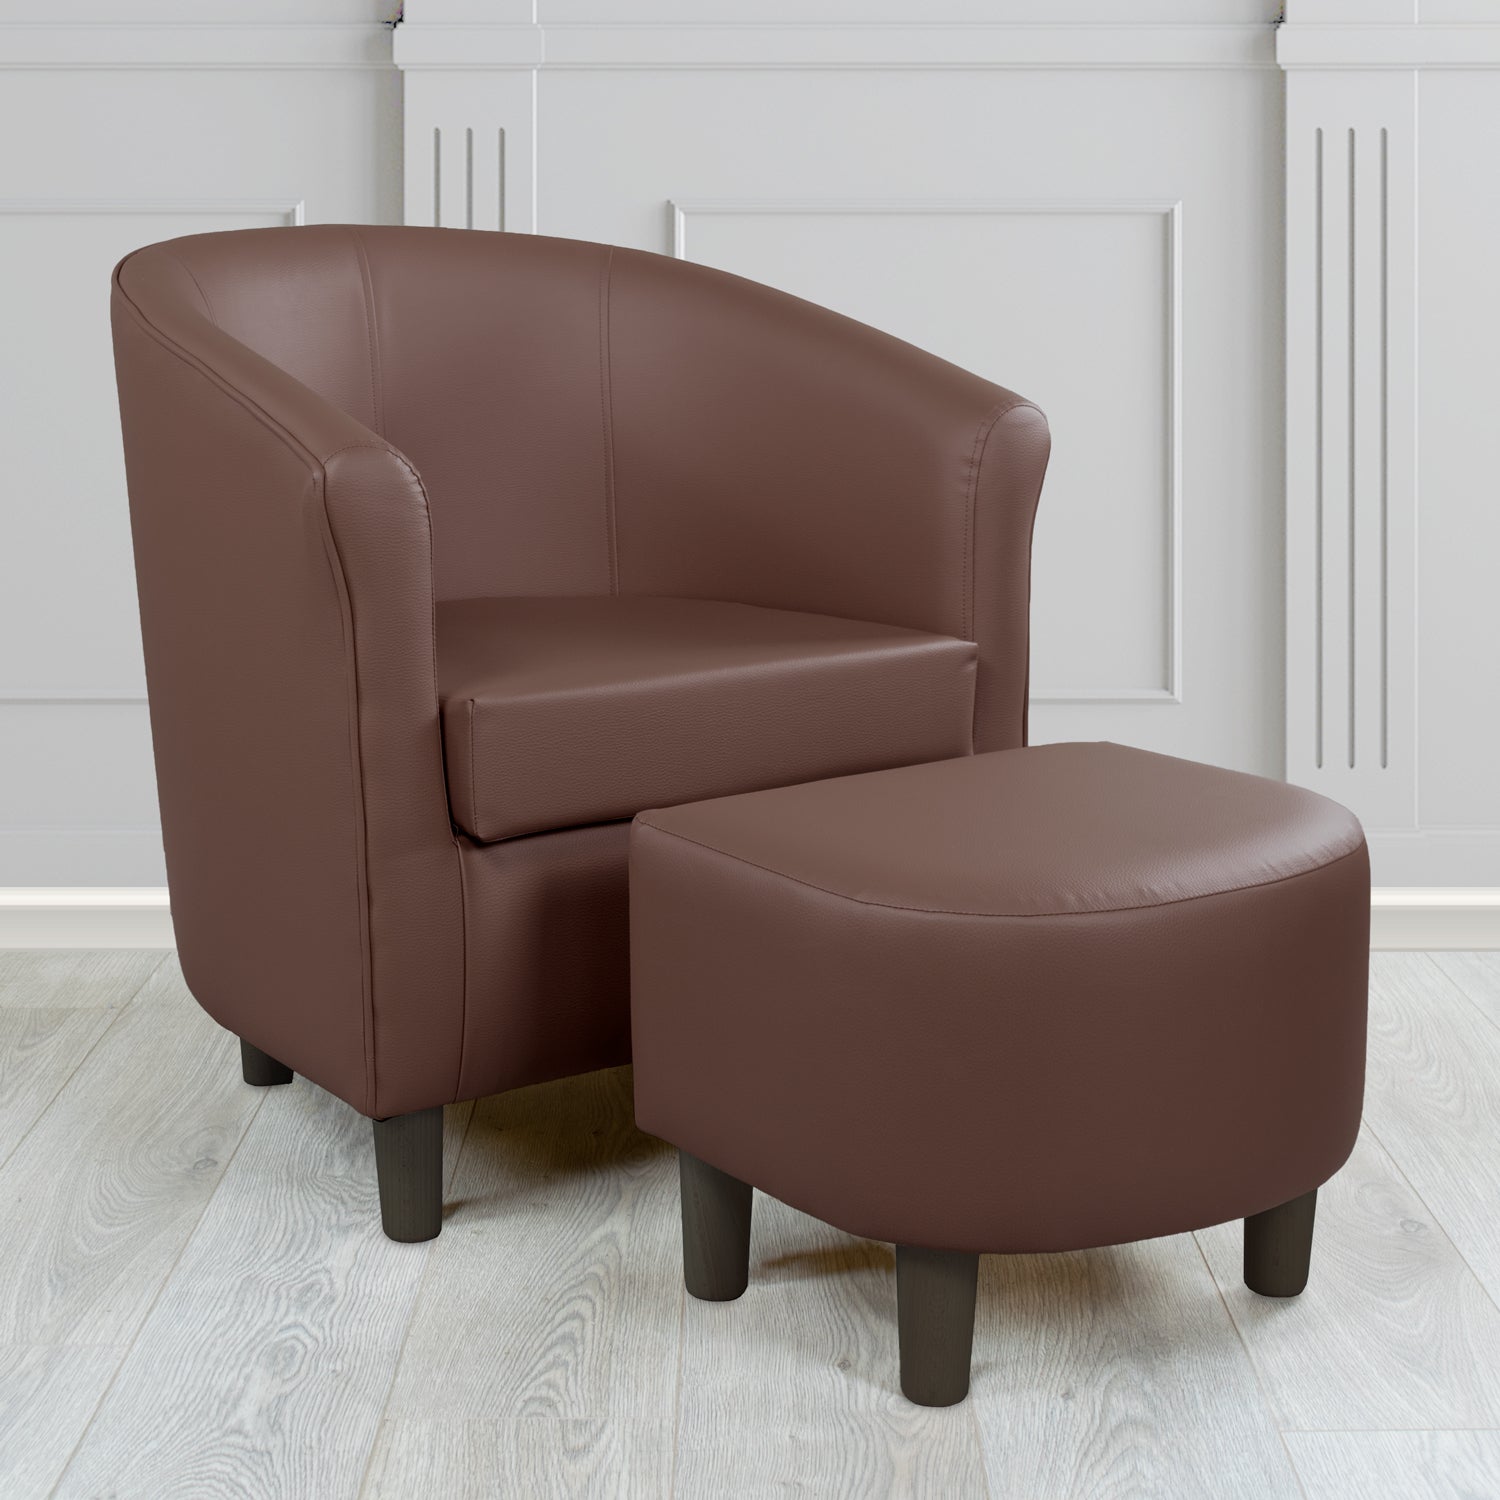 Tuscany Just Colour Cocoa Faux Leather Tub Chair with Dee Footstool Set - The Tub Chair Shop